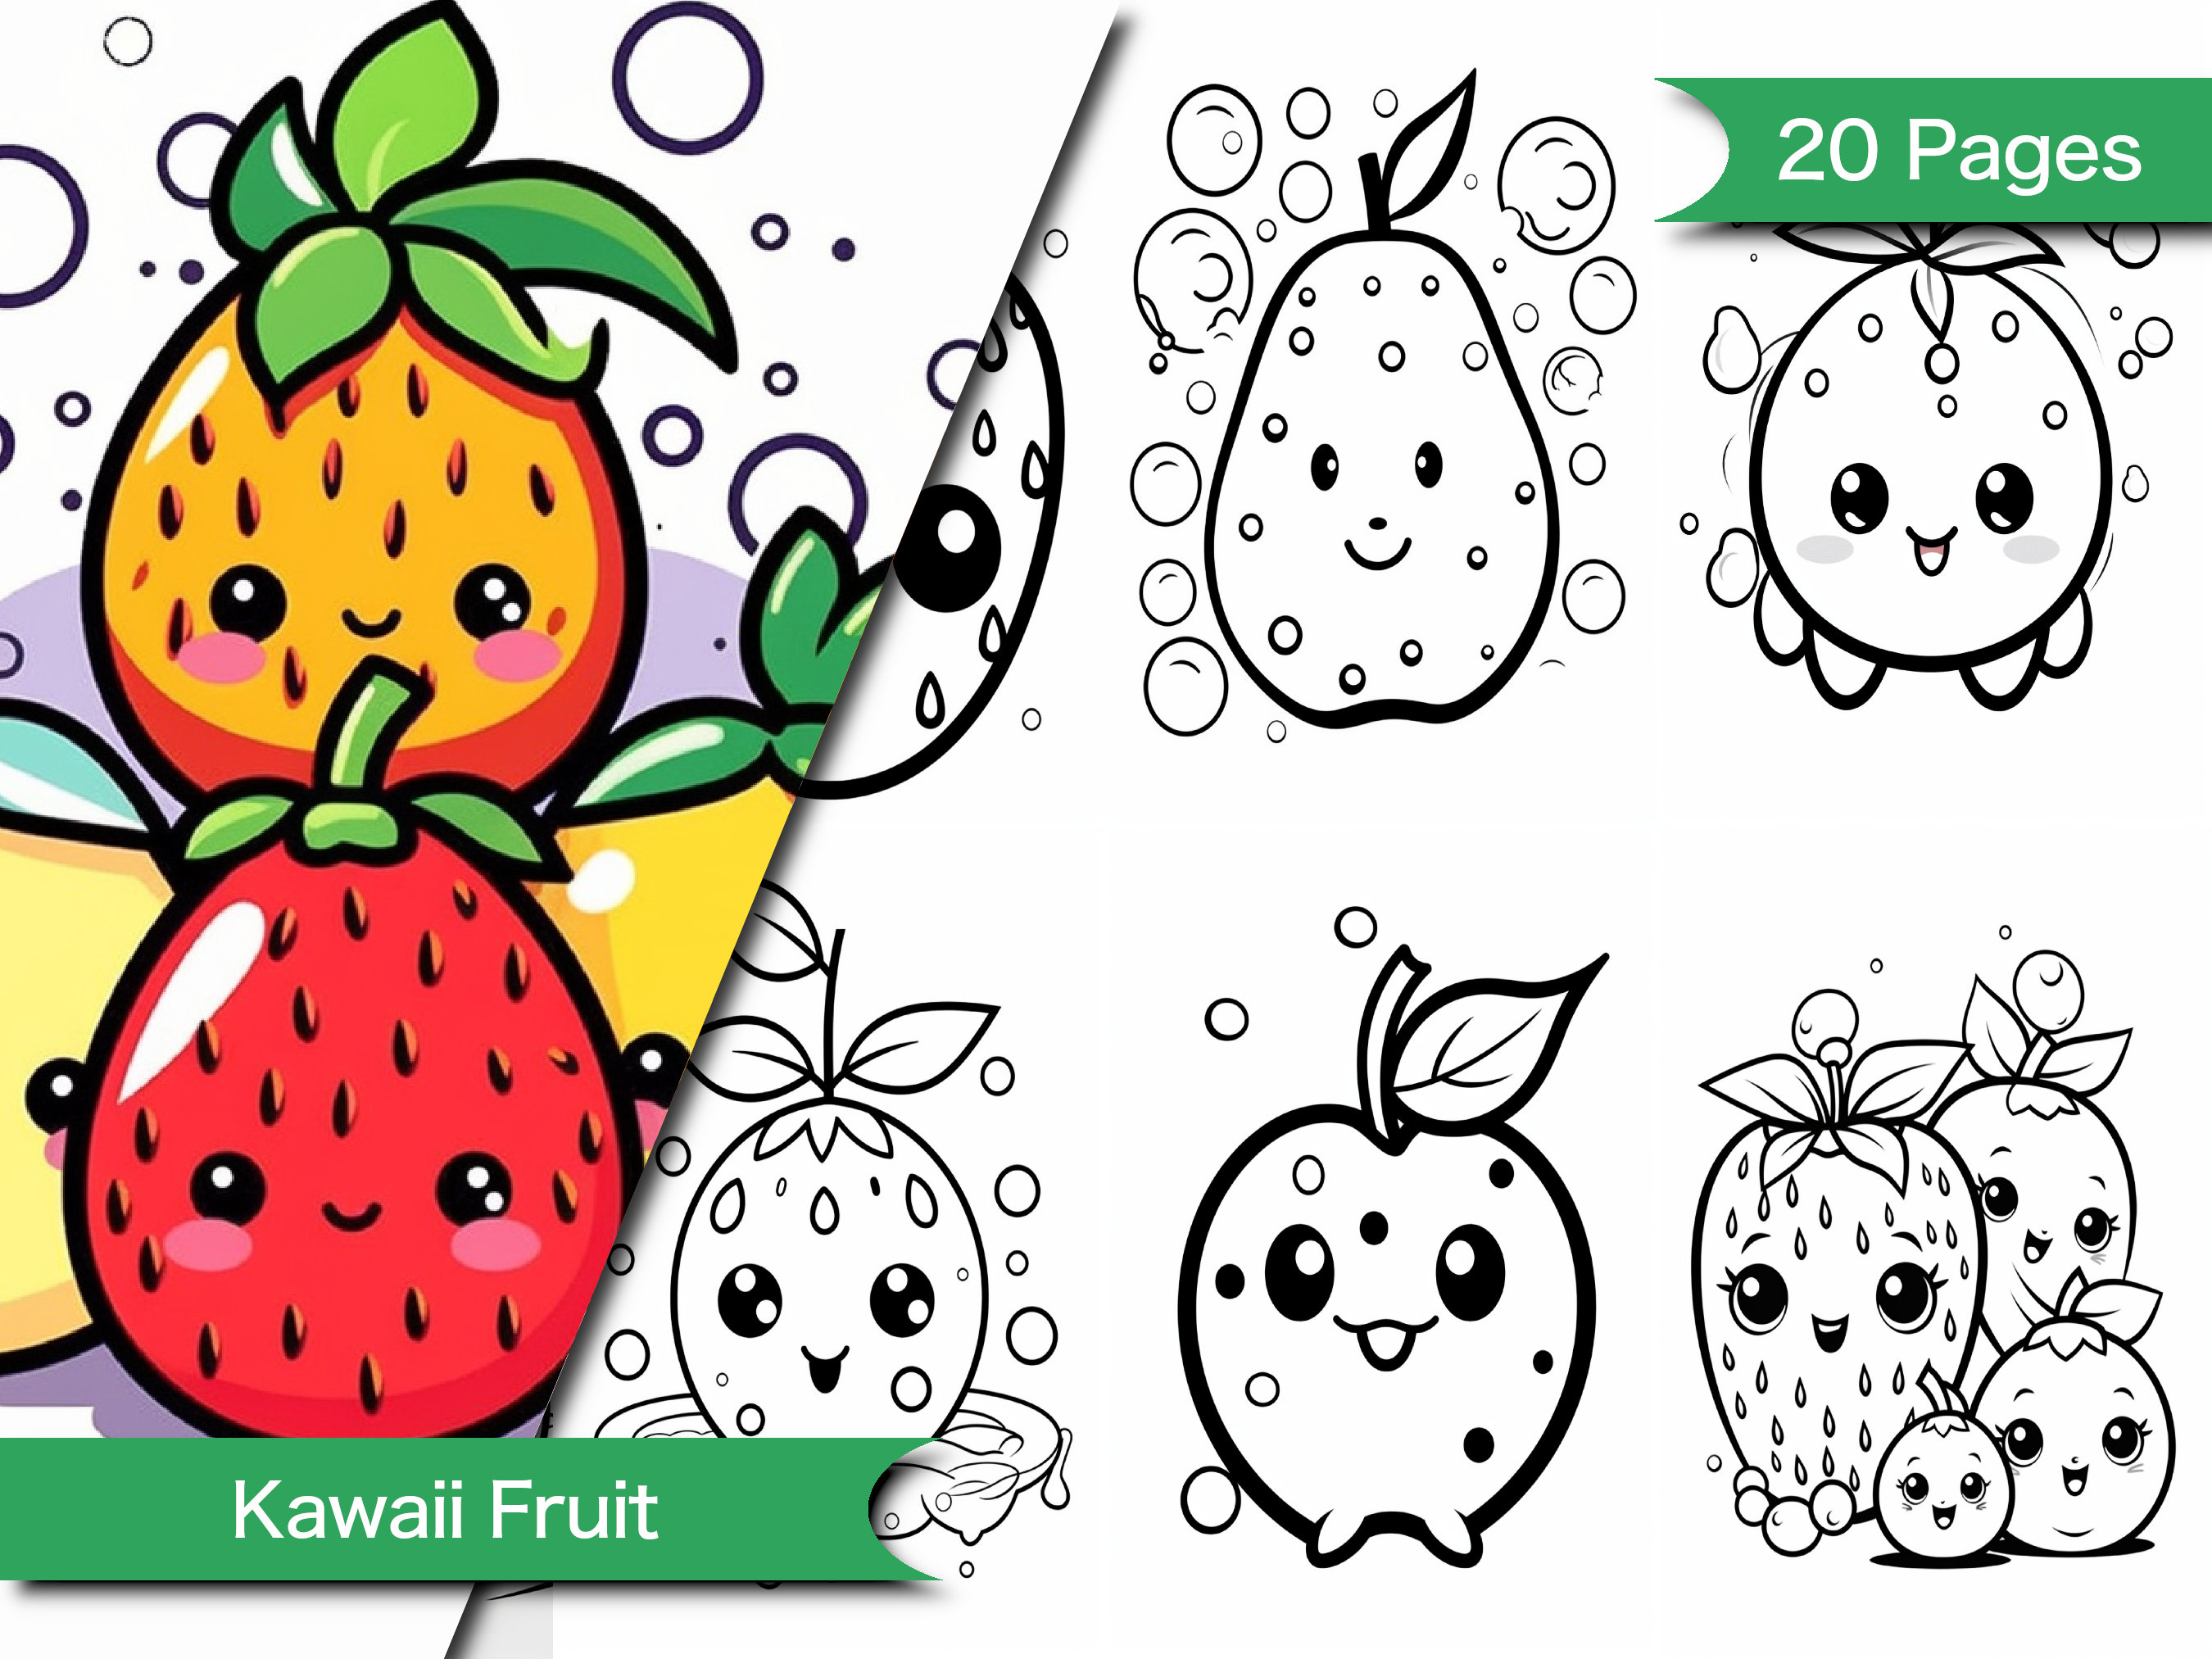 Kawaii fruit coloring book adorable fruit illustrations for summer vibes and creative fun coloring parties kawaii instant download